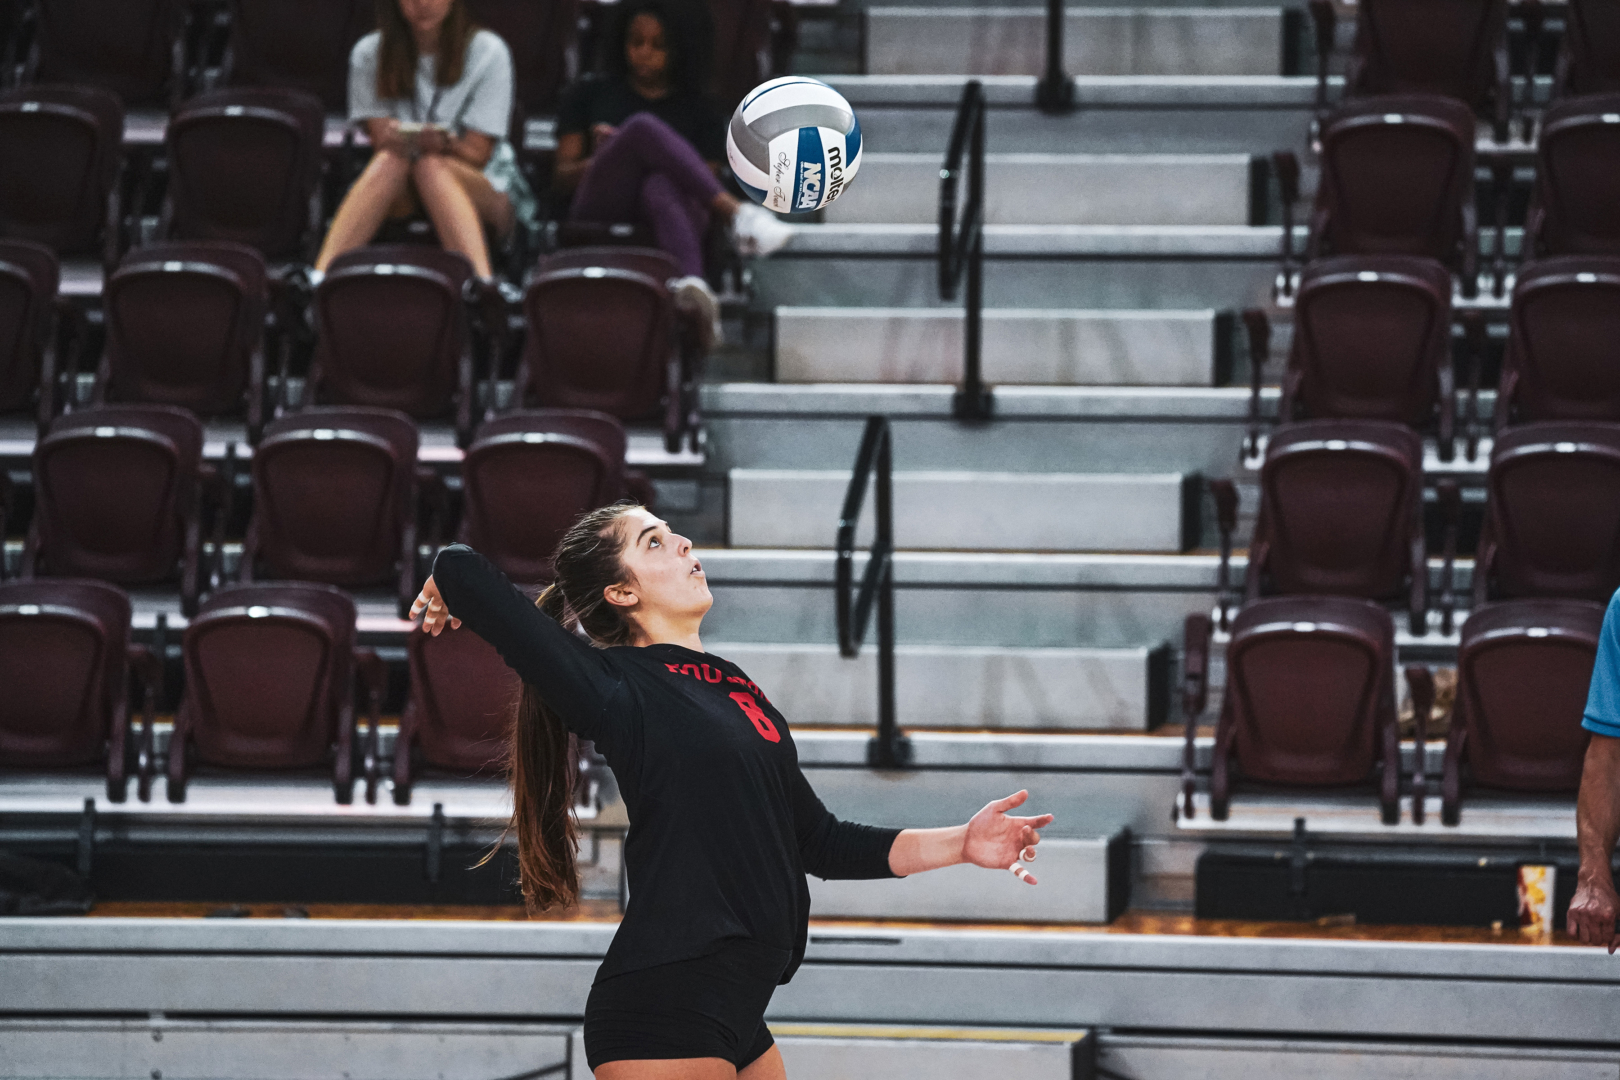 Senior middle blocker Isabel Theut is one of the veteran leaders on the 2021 UH volleyball roster, playing a big role in the Cougars' hot start to the season. | Courtesy of UH athletics